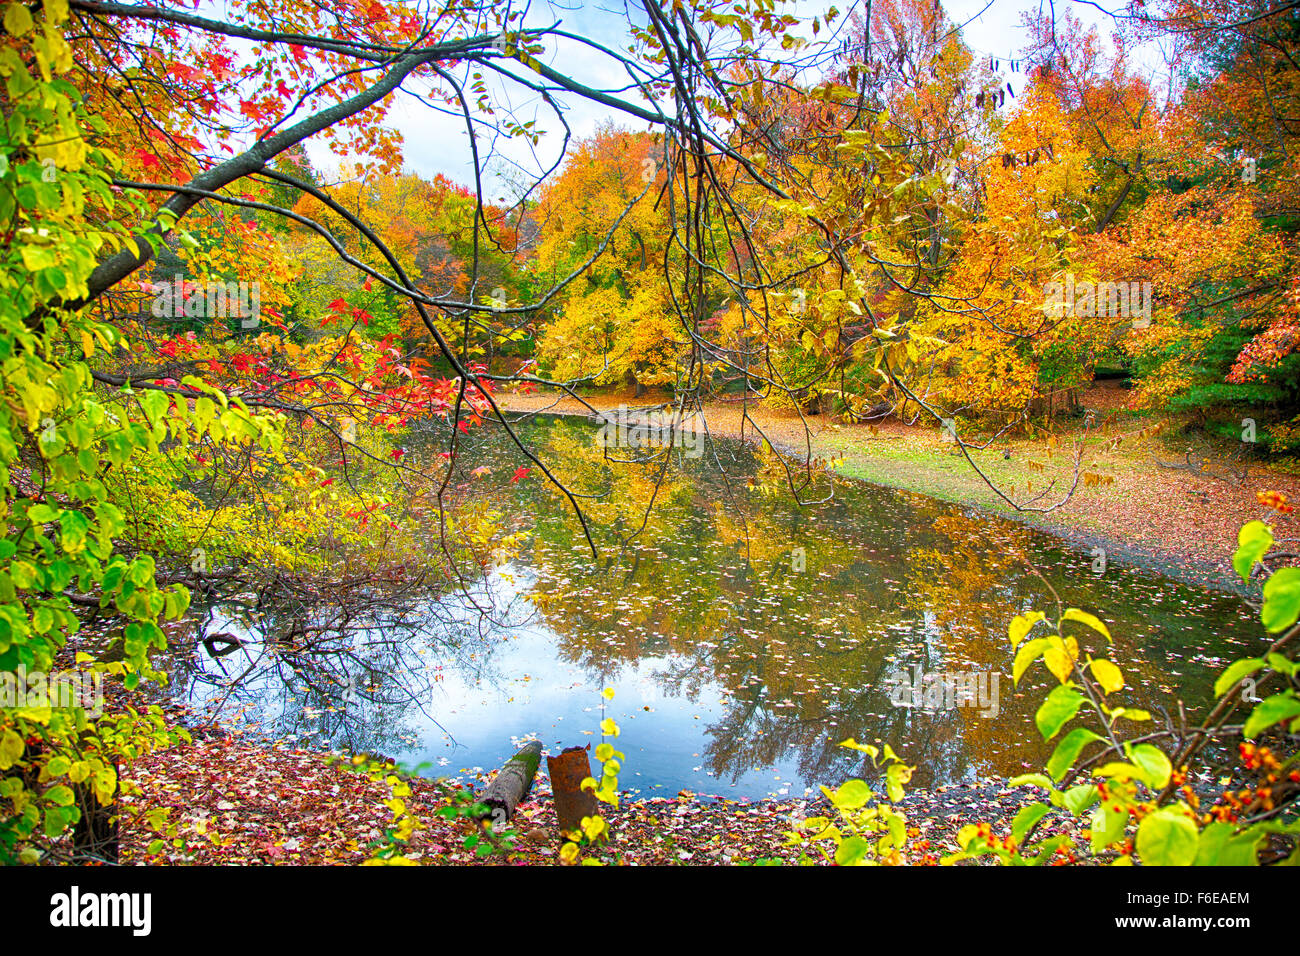 The changing leaves bring splashes of color to the parks and streams in Medford, NJ. Stock Photo